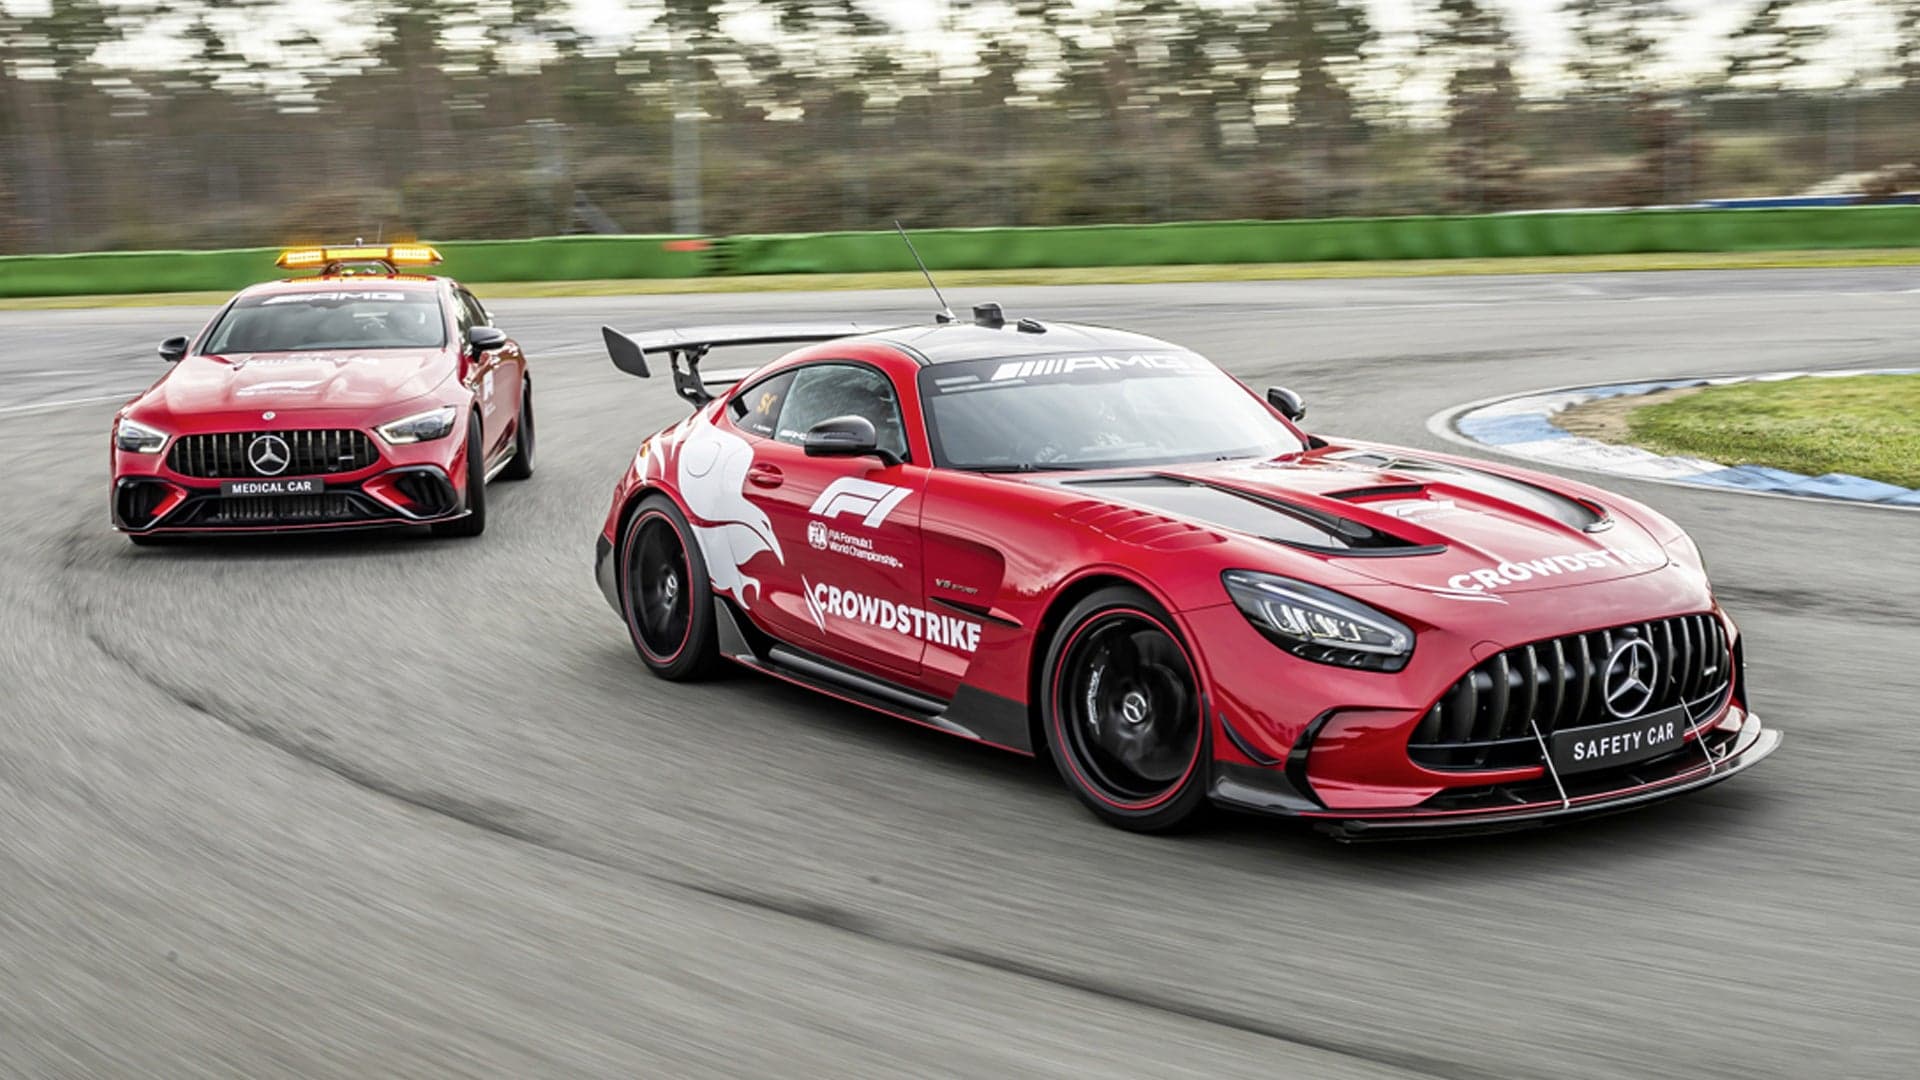 The 720-HP Mercedes-AMG GT Black Series Is Now an F1 Safety Car